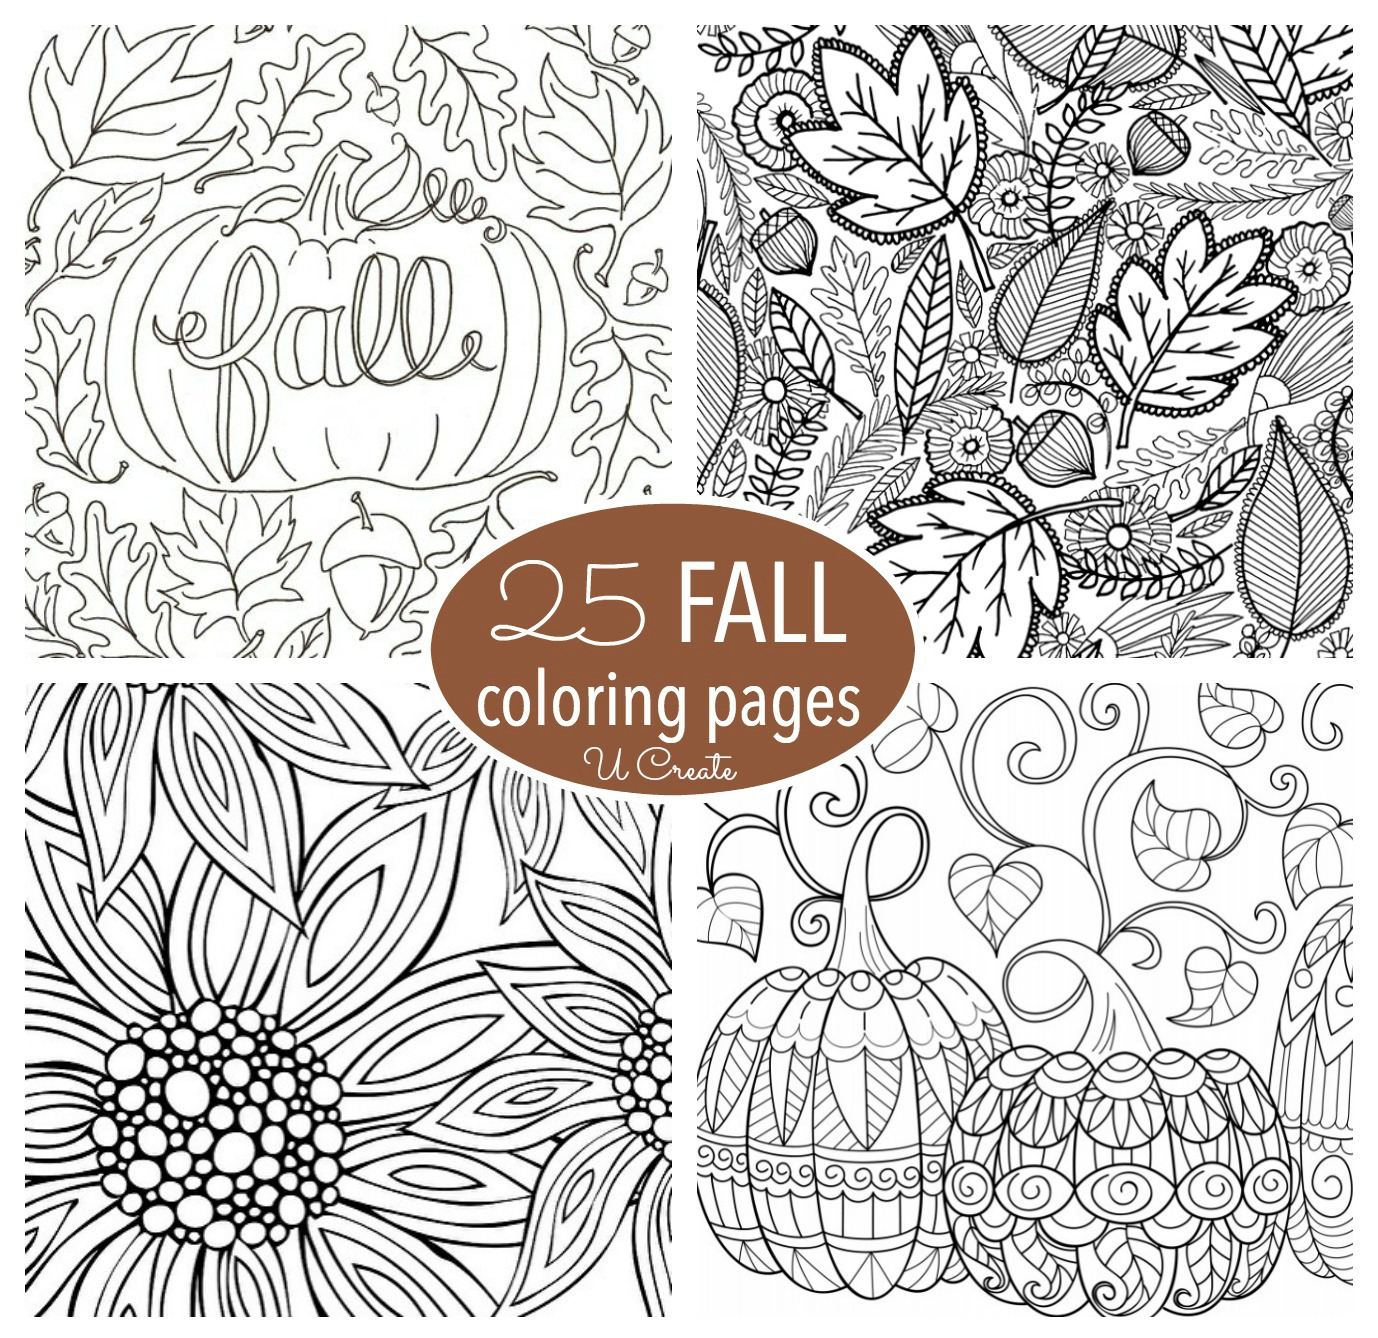 Coloring Pages Autumn Season Free Fall Adult Coloring Pages U Create